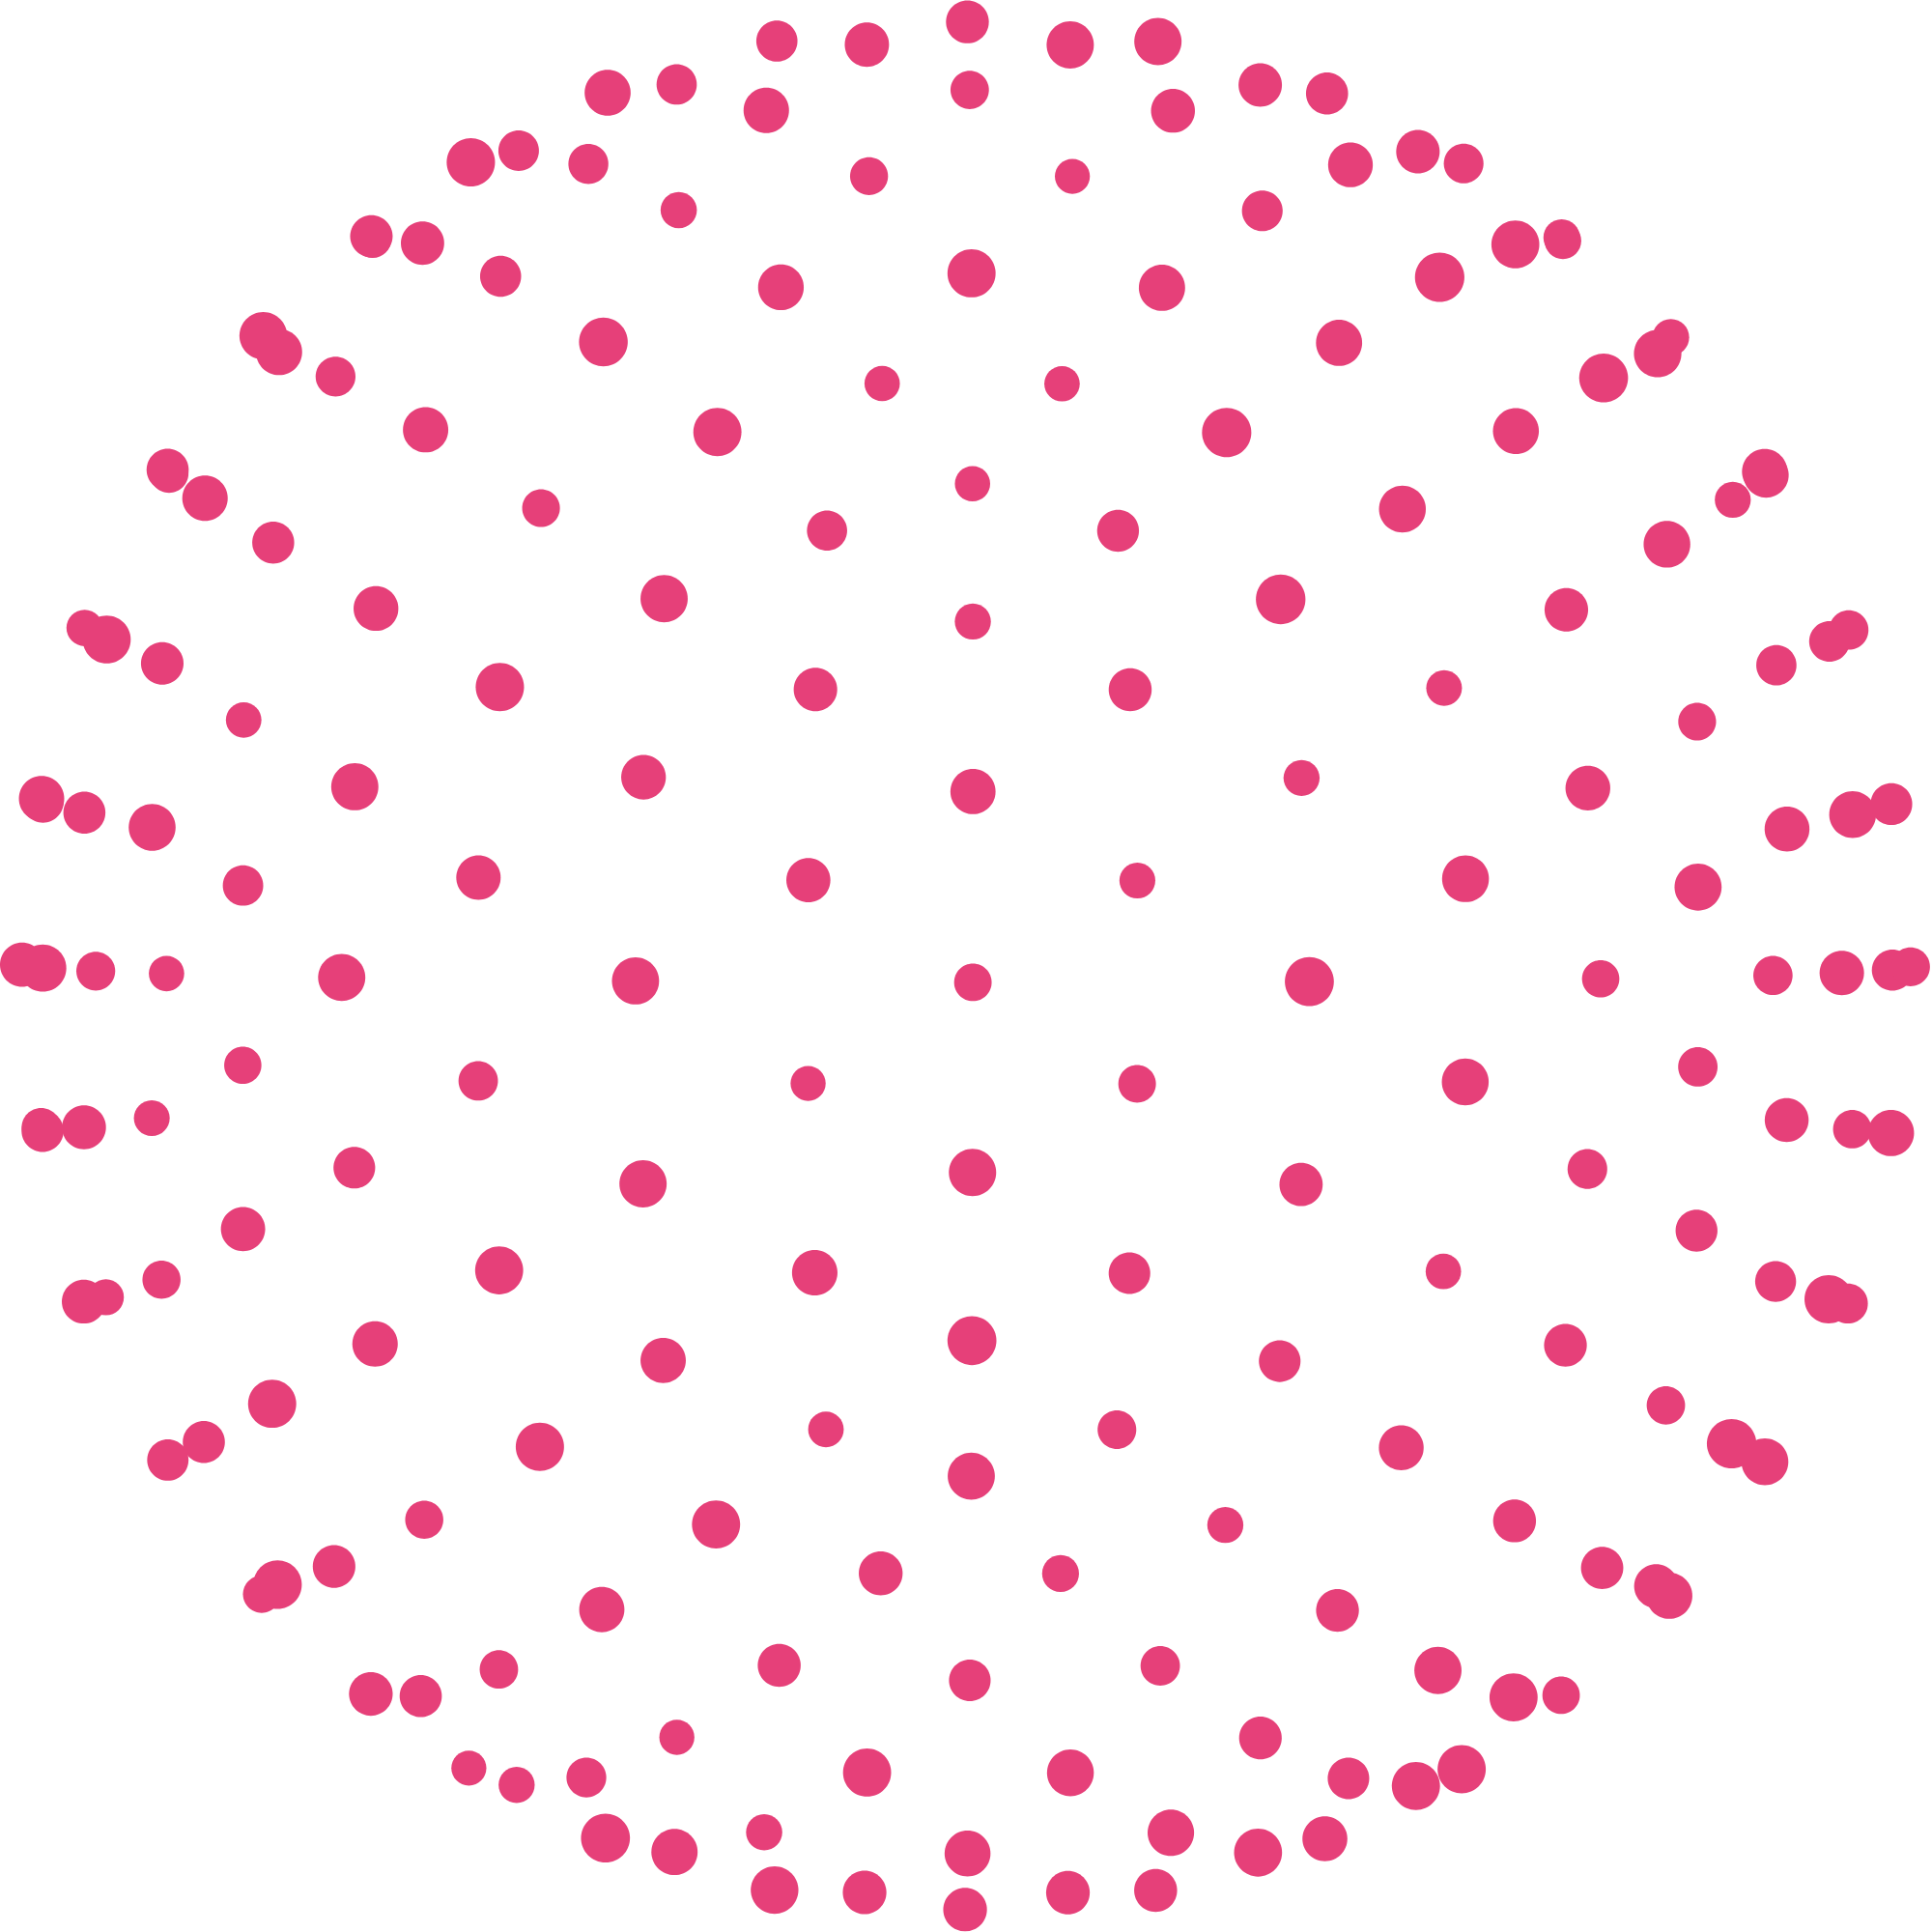 Pink dots organized in a sphere